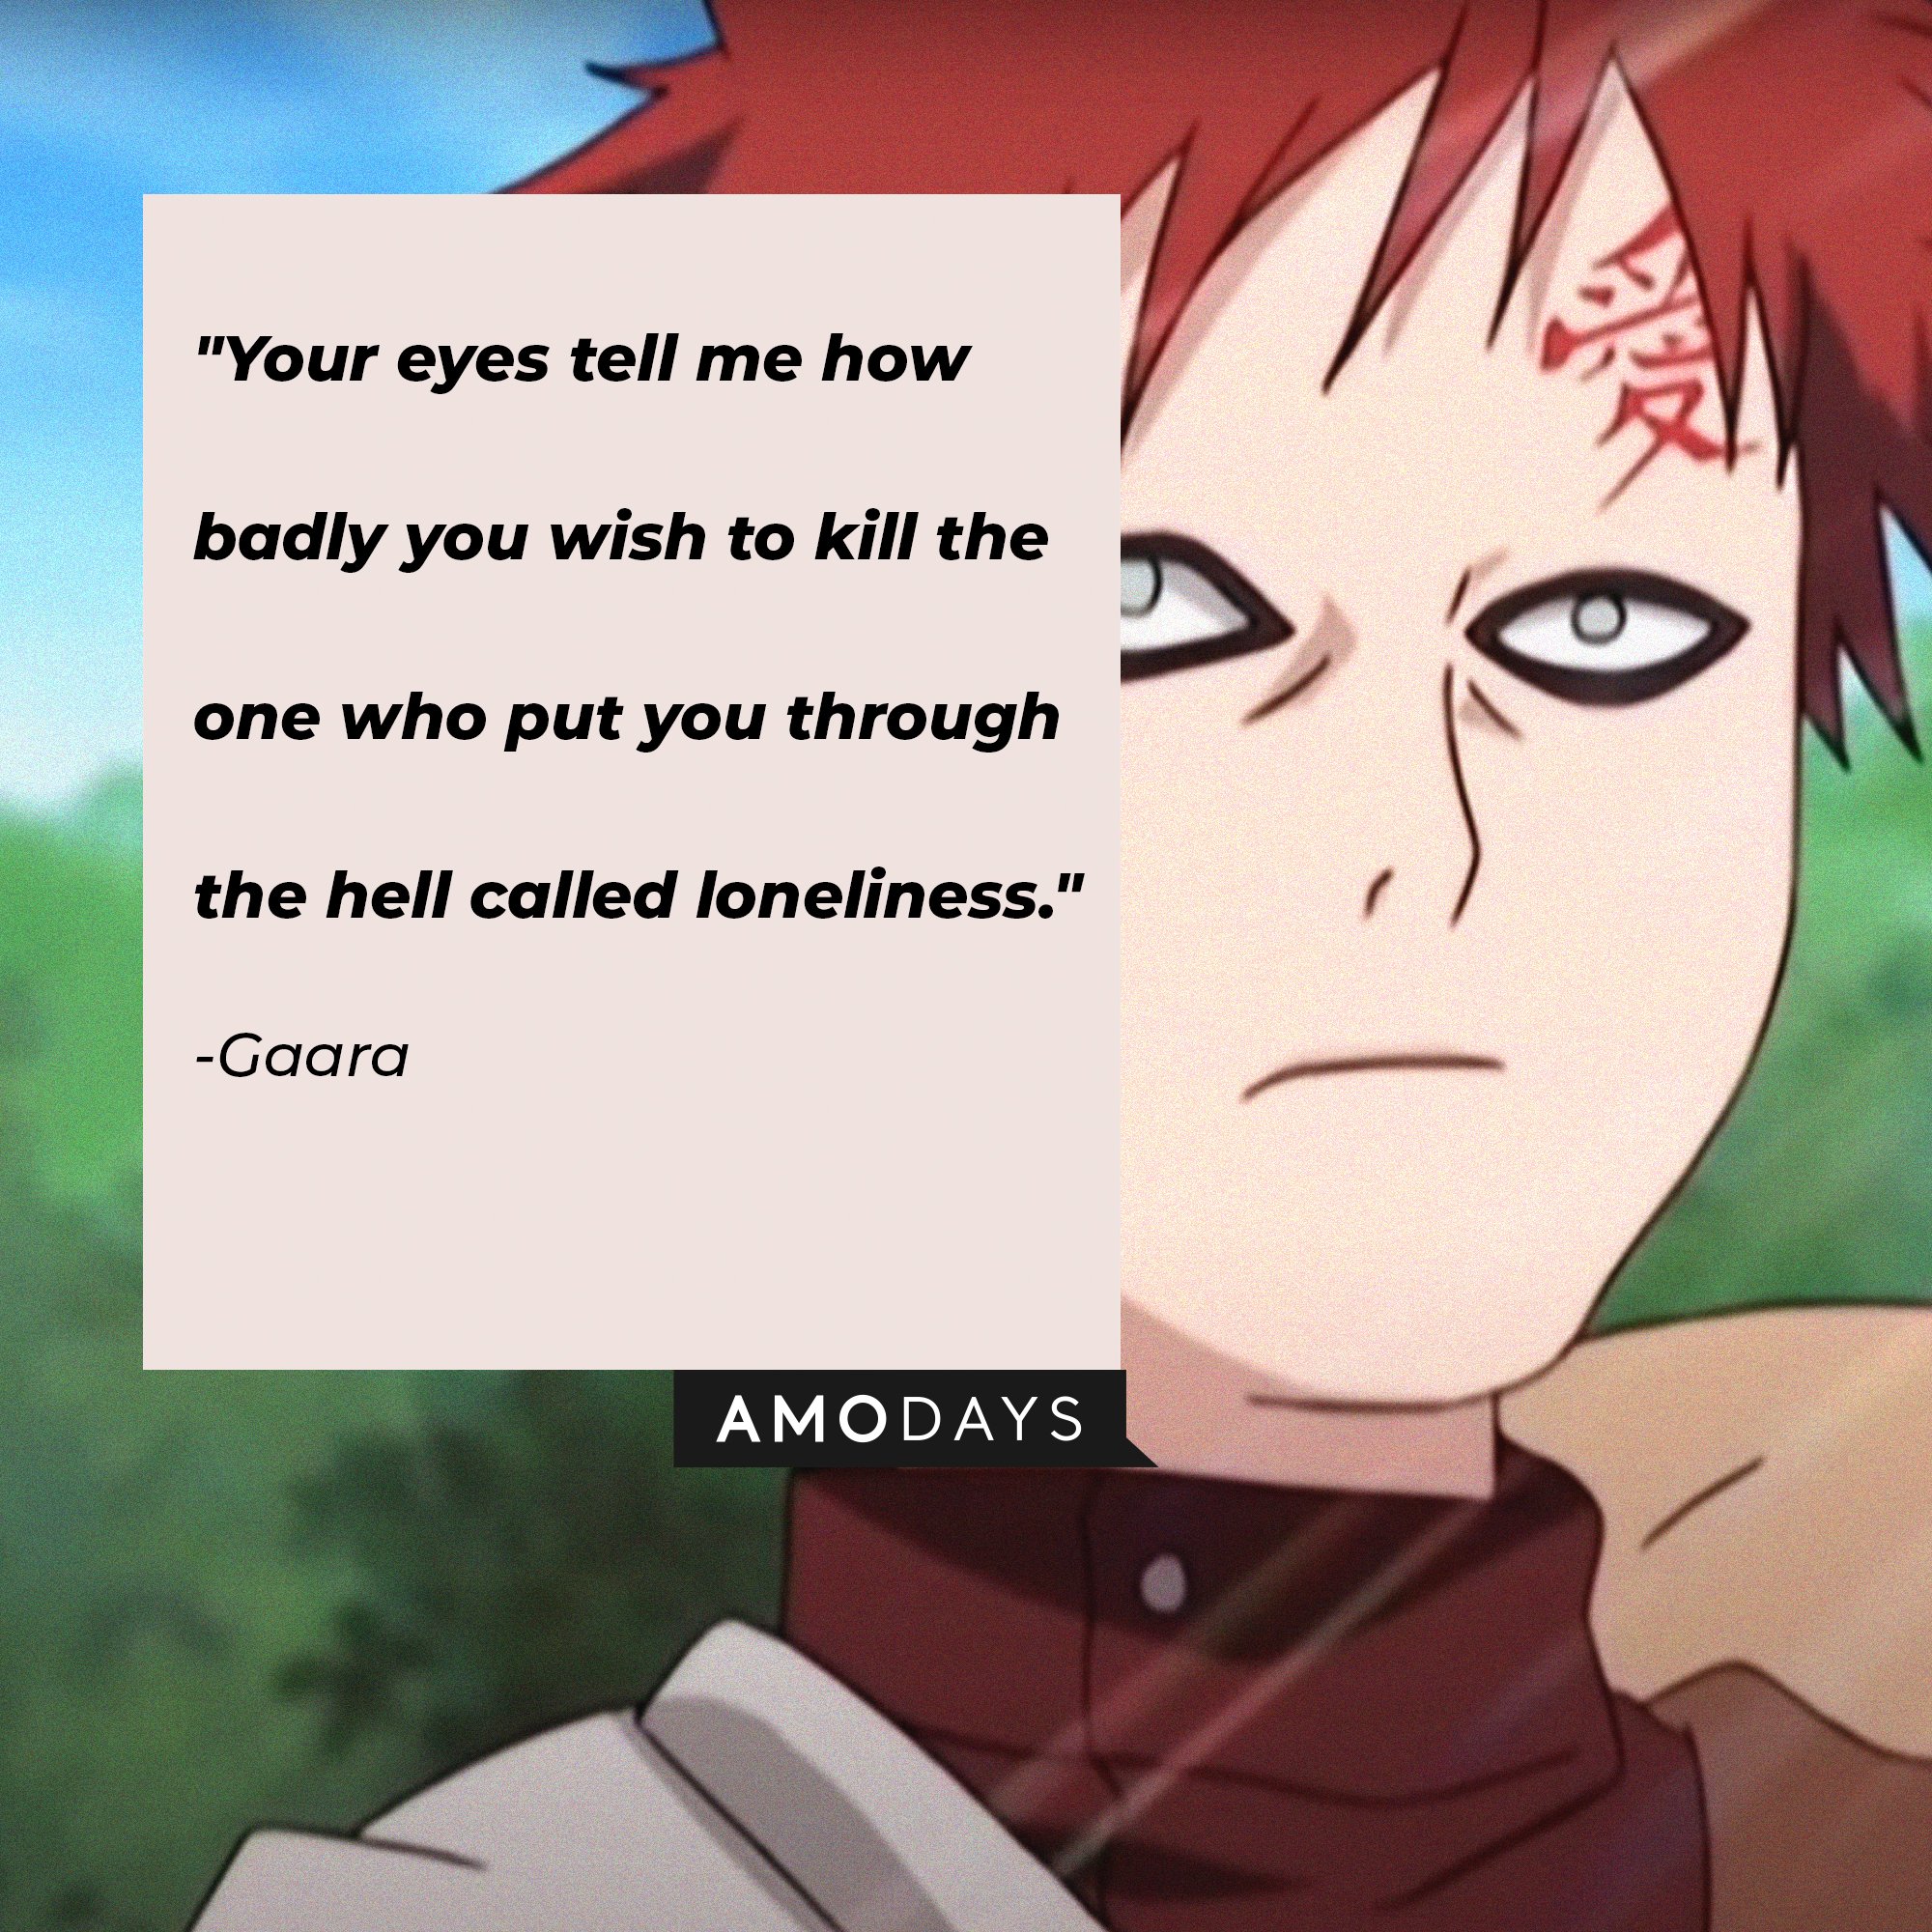 Gaara’s quote: "Your eyes tell me how badly you wish to kill the one who put you through the hell called loneliness." | Image: AmoDays